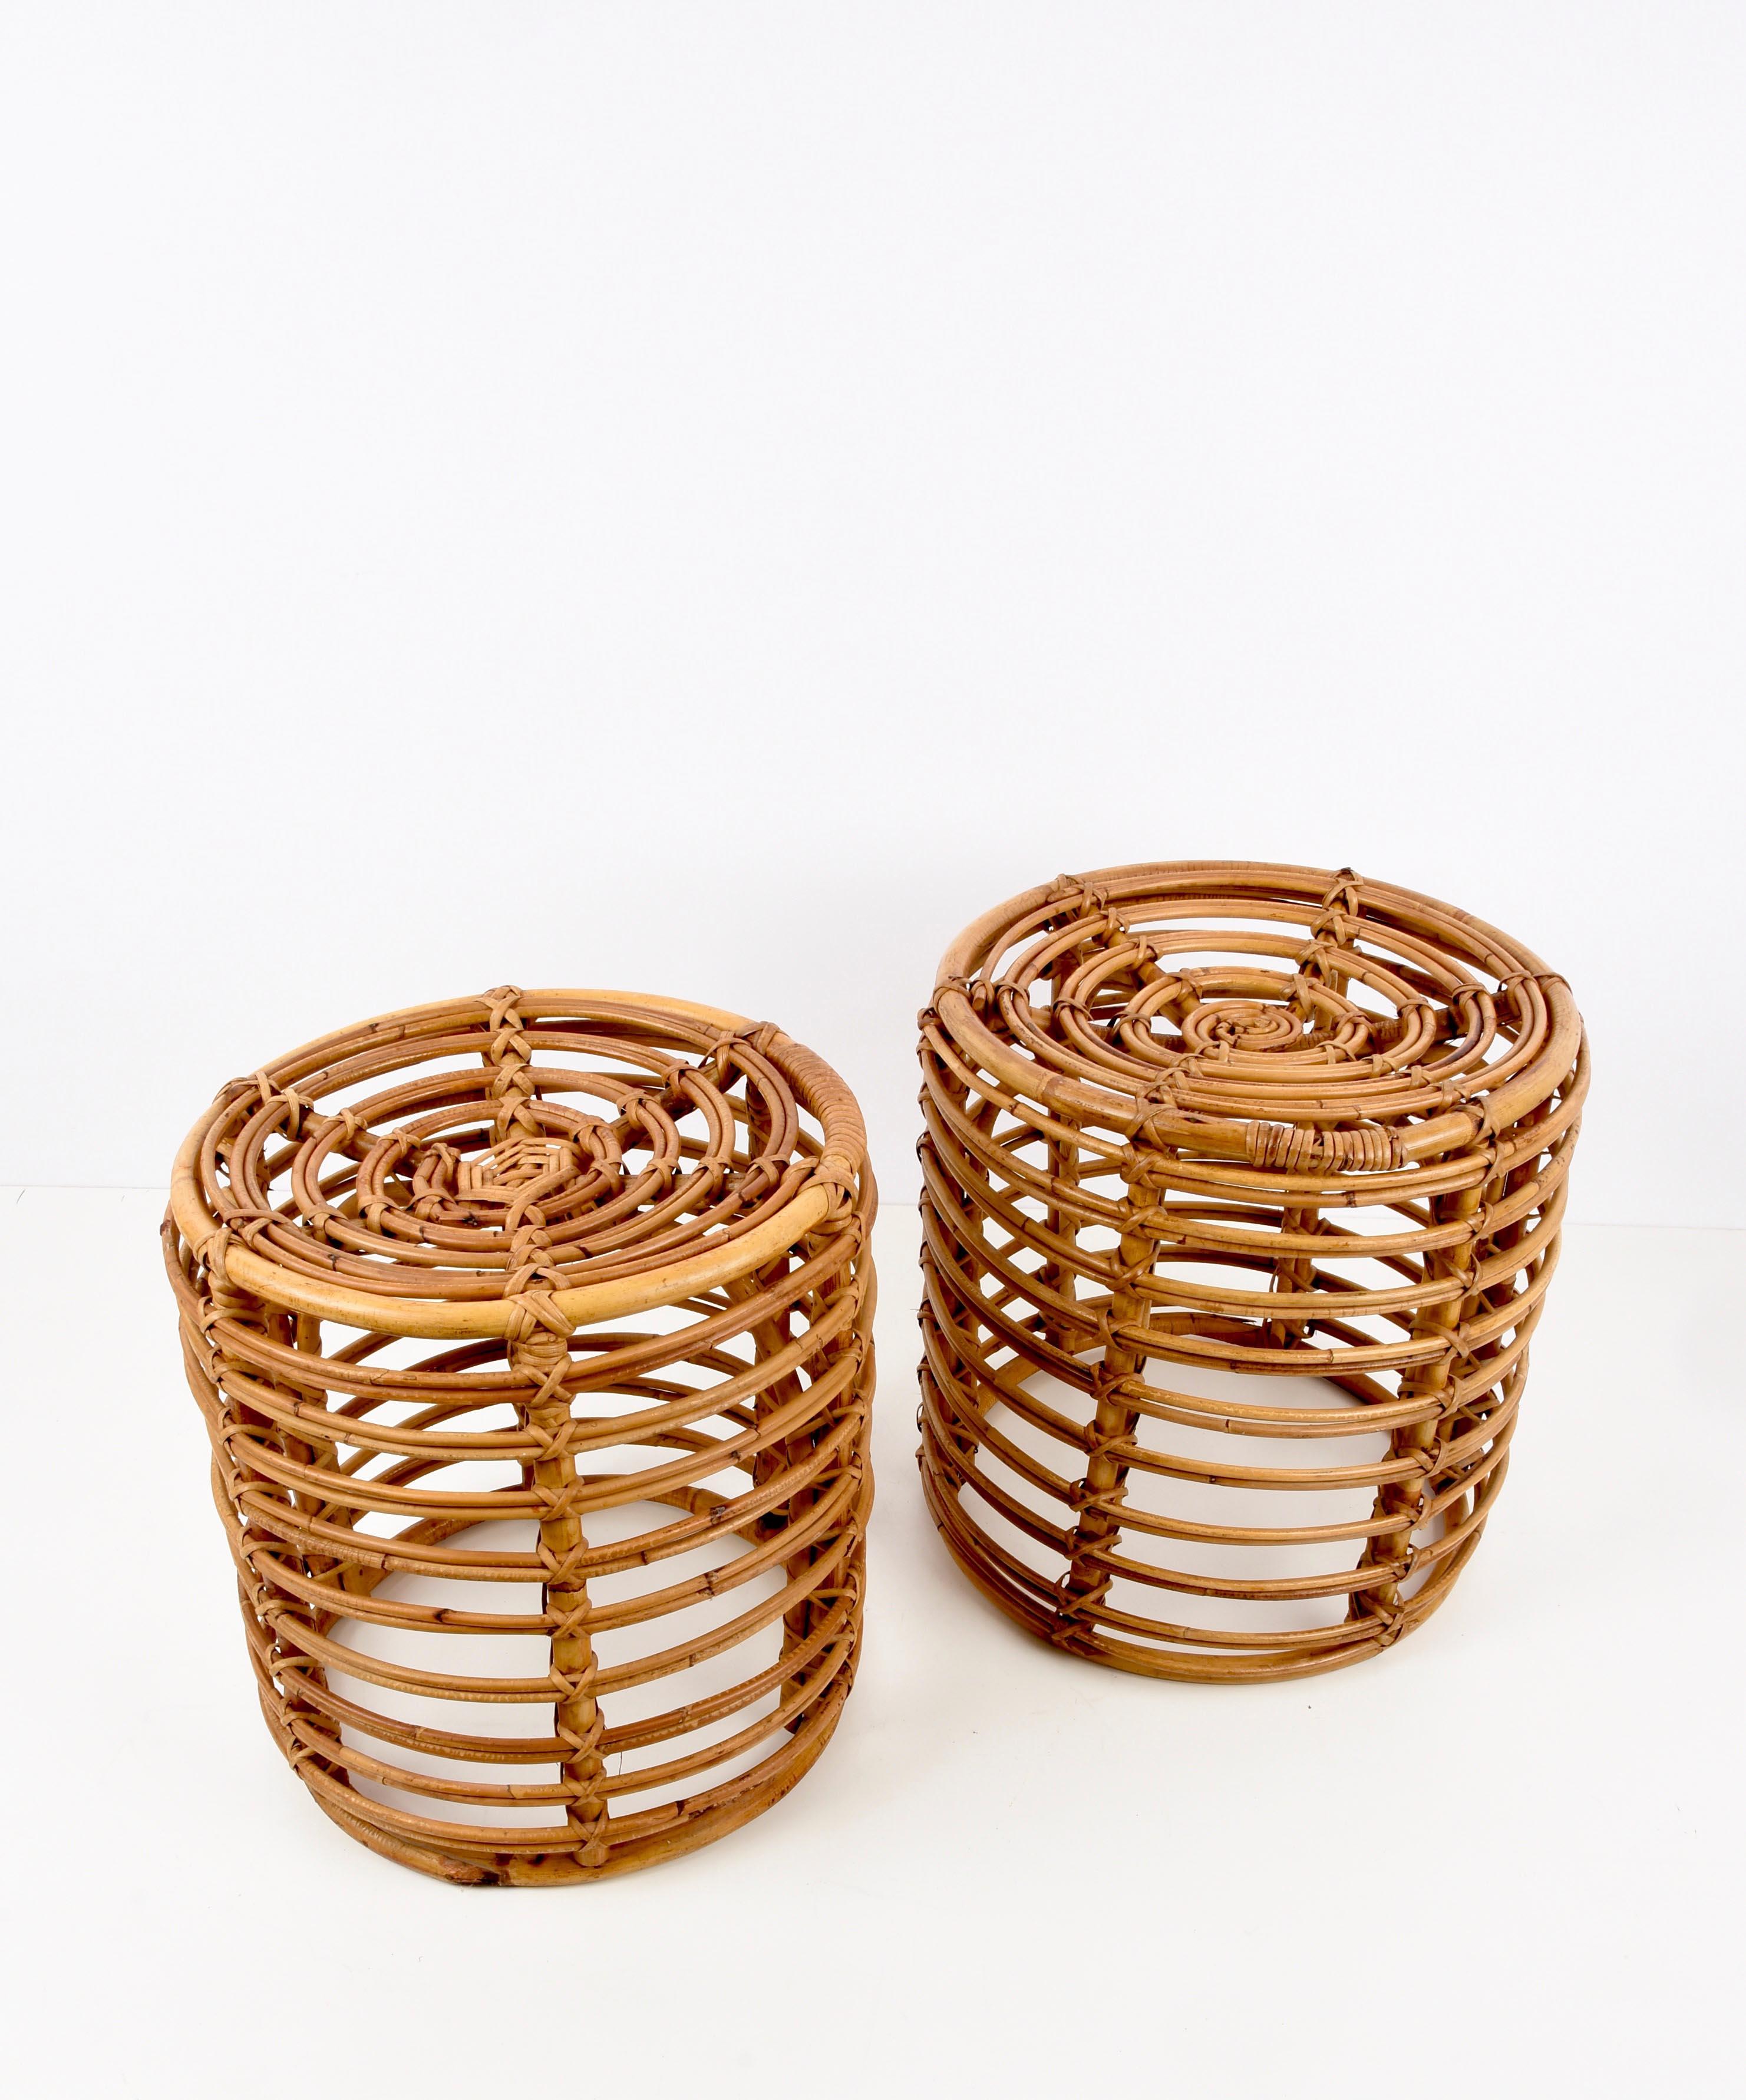 20th Century Pair of Midcentury Bamboo and Wicker Italian Pouf Stools, 1960s